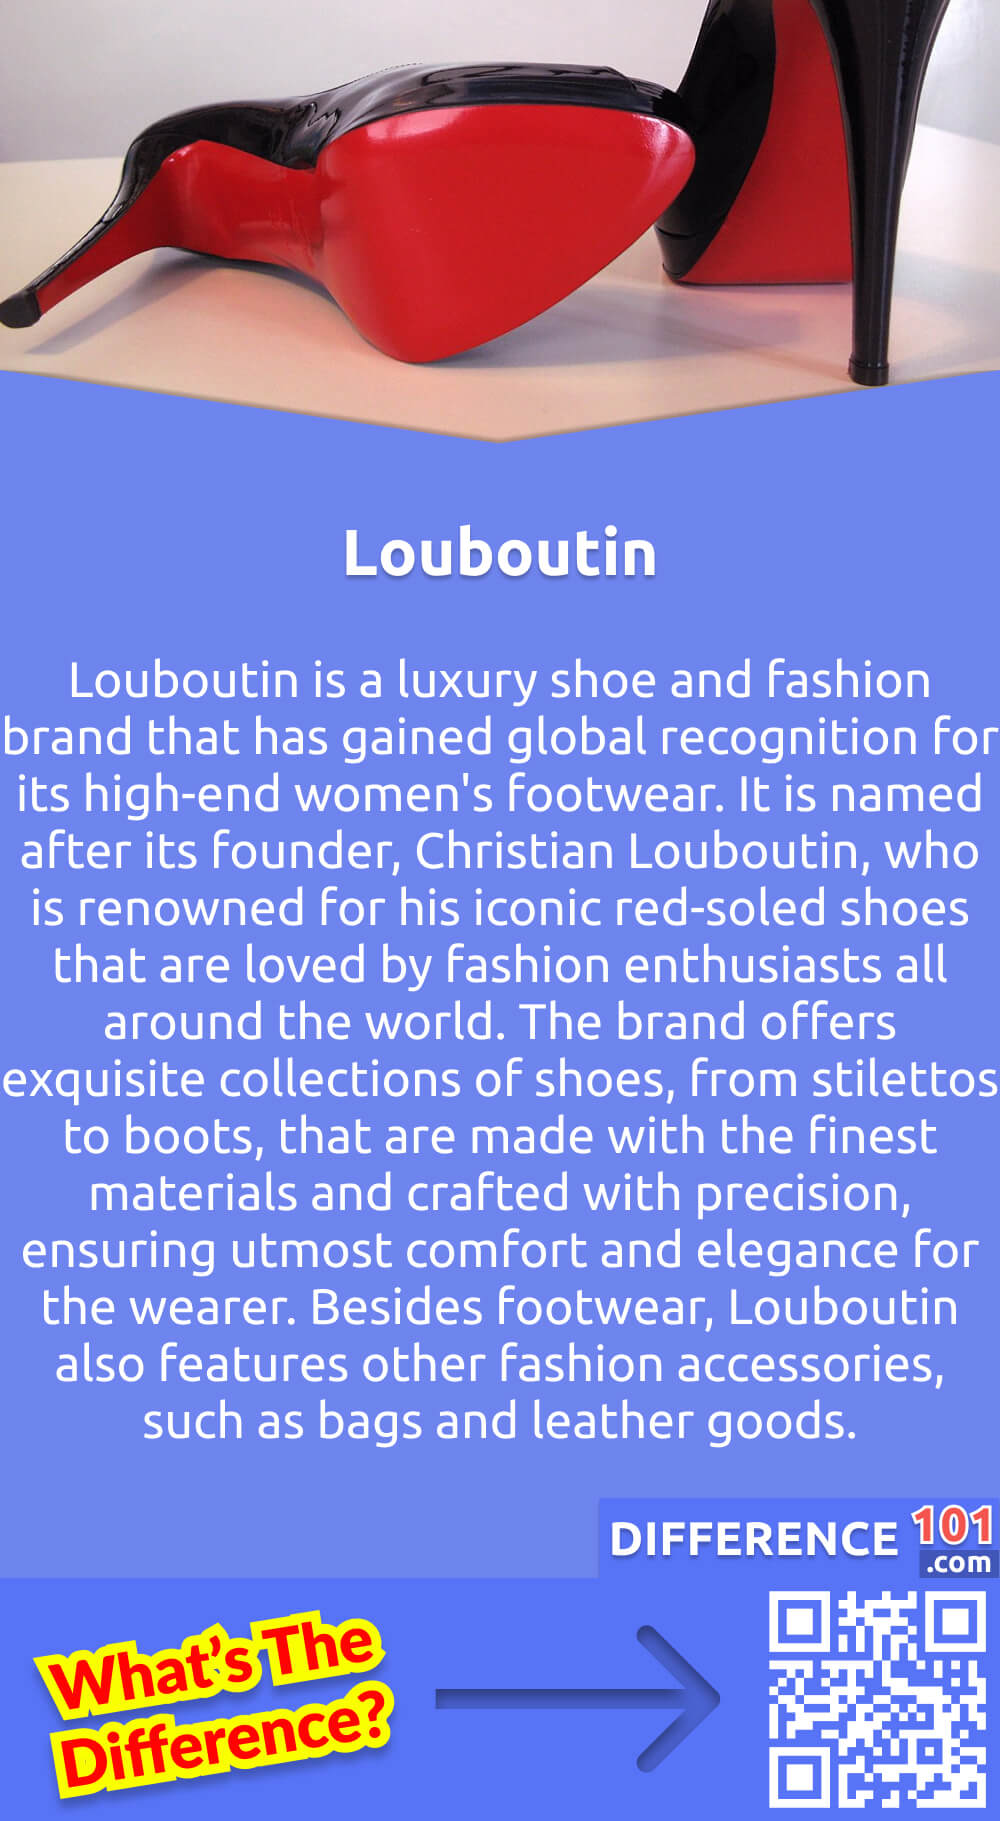 What Is Louboutin? Louboutin is a luxury shoe and fashion brand that has gained global recognition for its high-end women's footwear. It is named after its founder, Christian Louboutin, who is renowned for his iconic red-soled shoes that are loved by fashion enthusiasts all around the world. The brand offers exquisite collections of shoes, from stilettos to boots, that are made with the finest materials and crafted with precision, ensuring utmost comfort and elegance for the wearer. Besides footwear, Louboutin also features other fashion accessories, such as bags and leather goods. With its innovative designs and refined craftsmanship, Louboutin is synonymous with style and sophistication in the fashion industry.